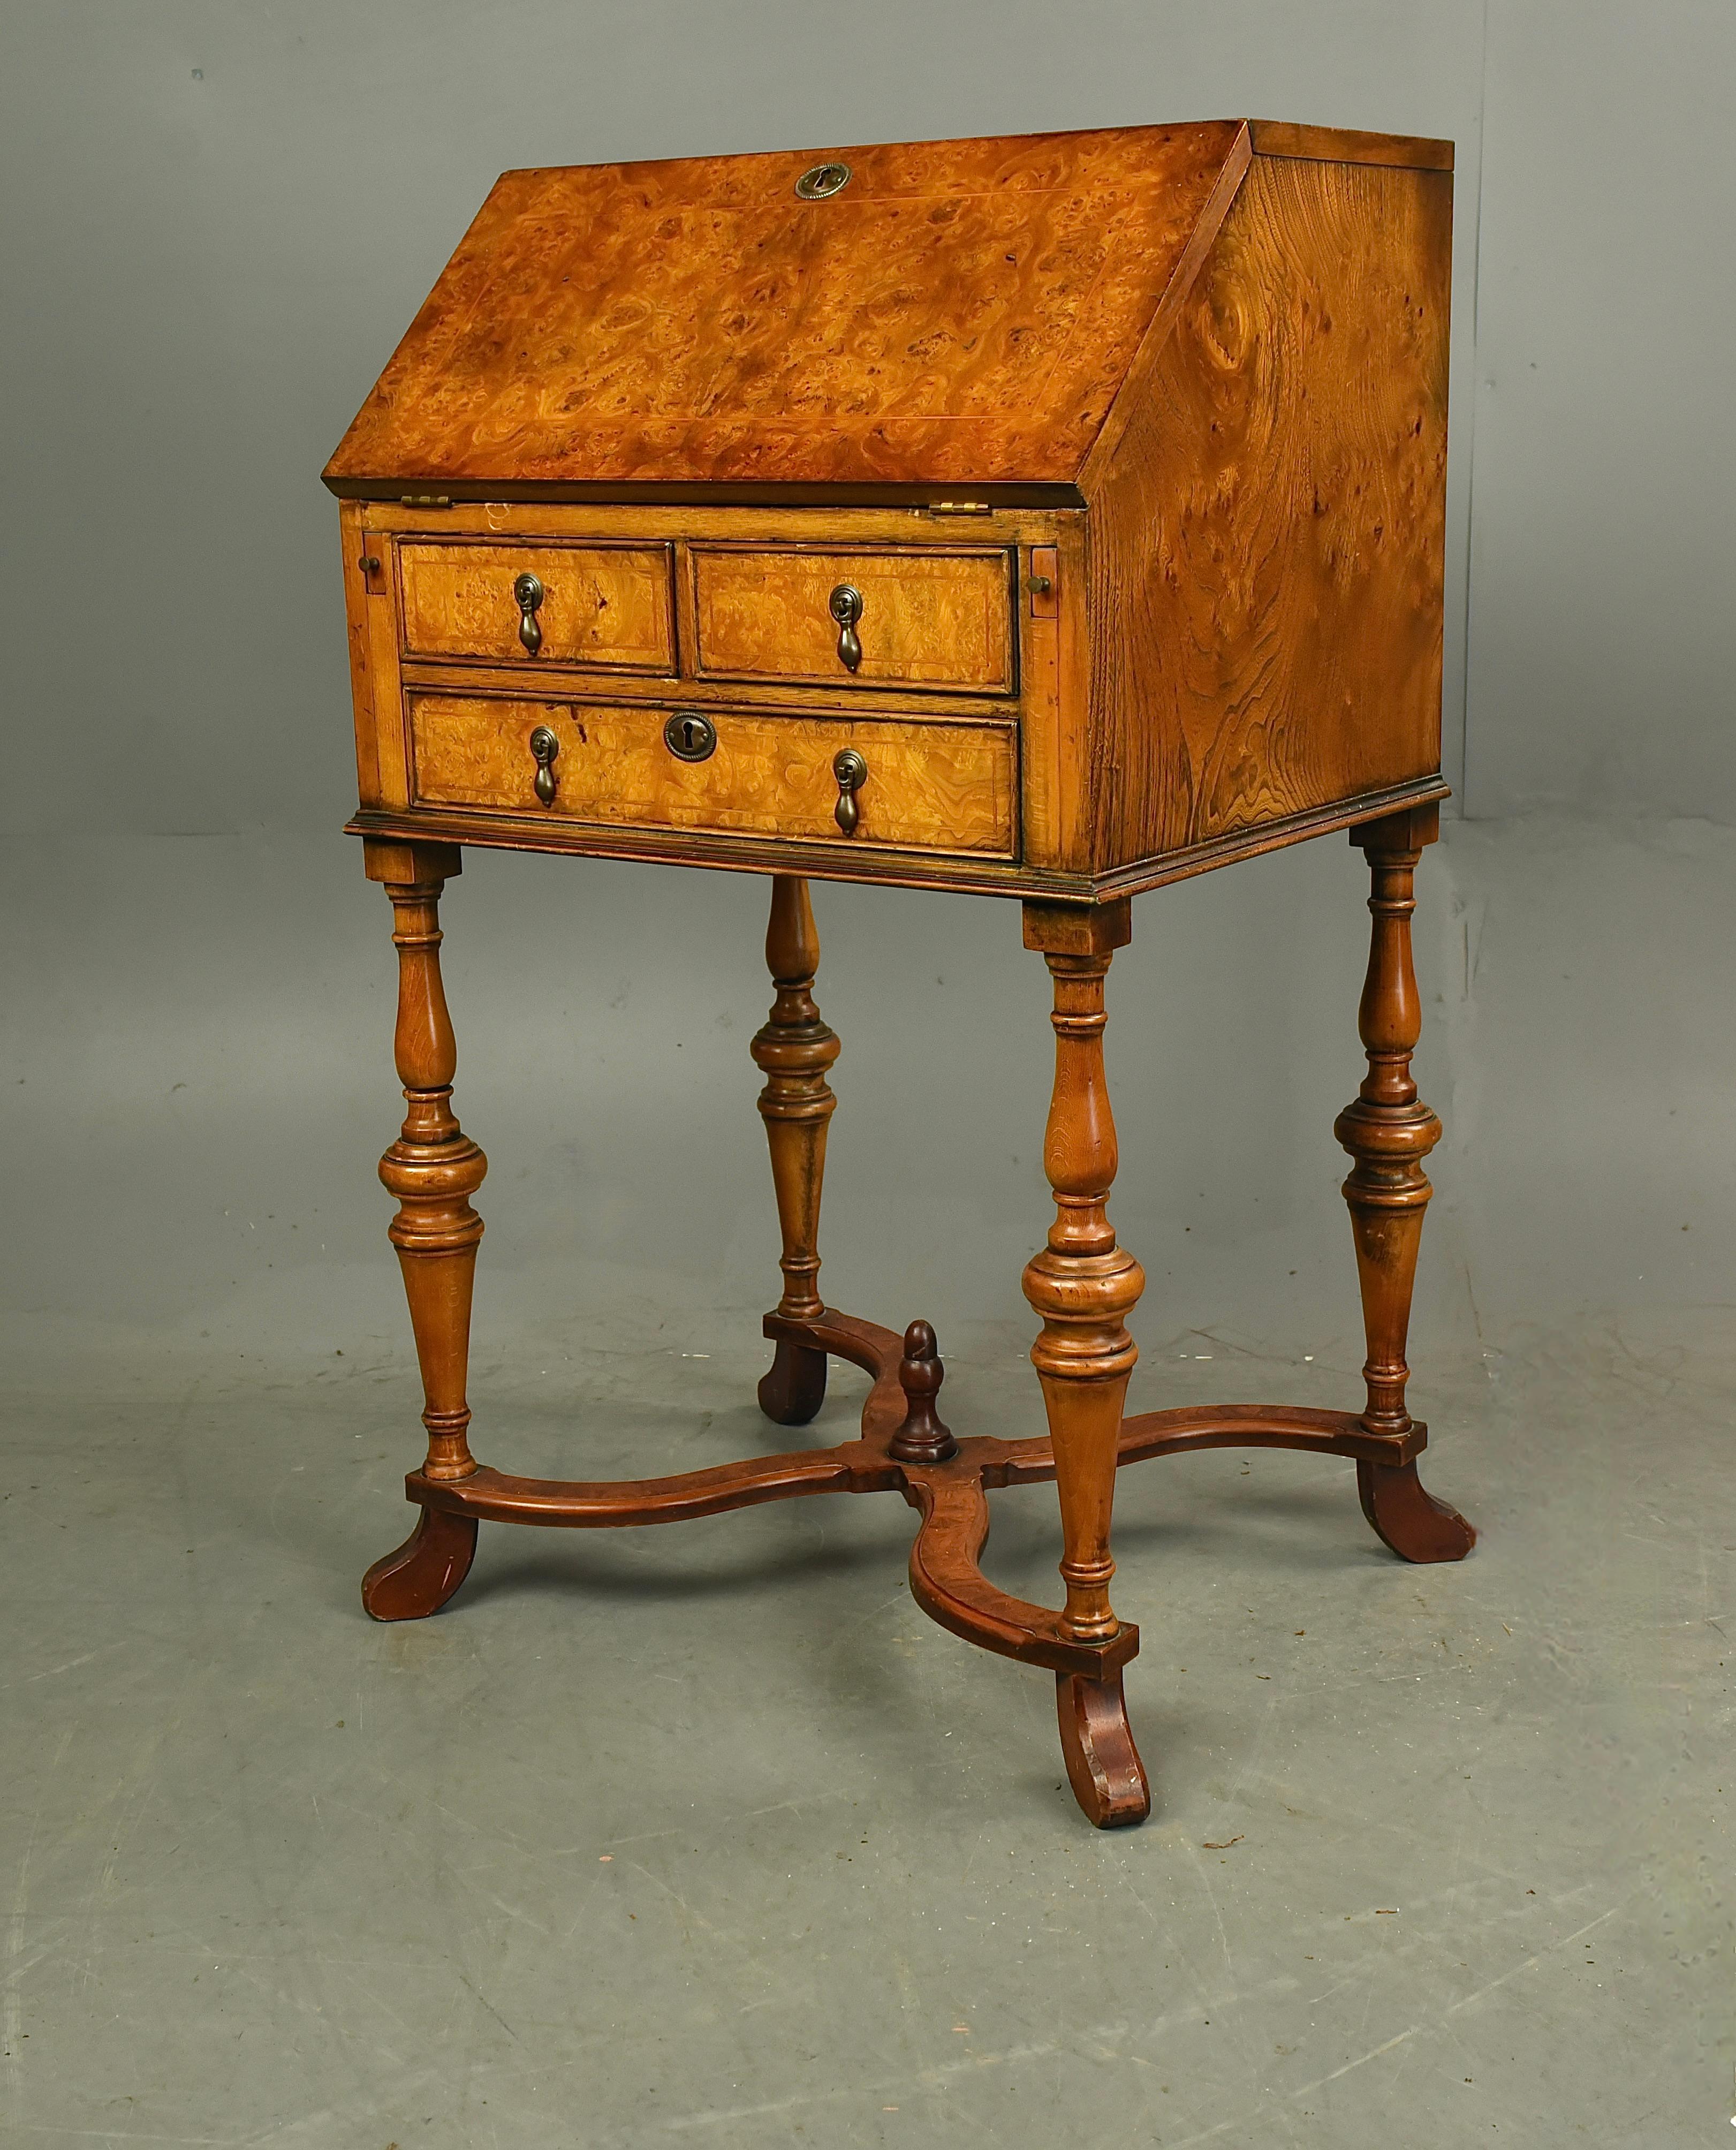 A good quality Queen Anne style walnut bureau .
A very well proportioned small size with a well fitted interior below there are three drawers ,the whole standing on turned legs united with a shaped stretcher .
There is a single key that fits all